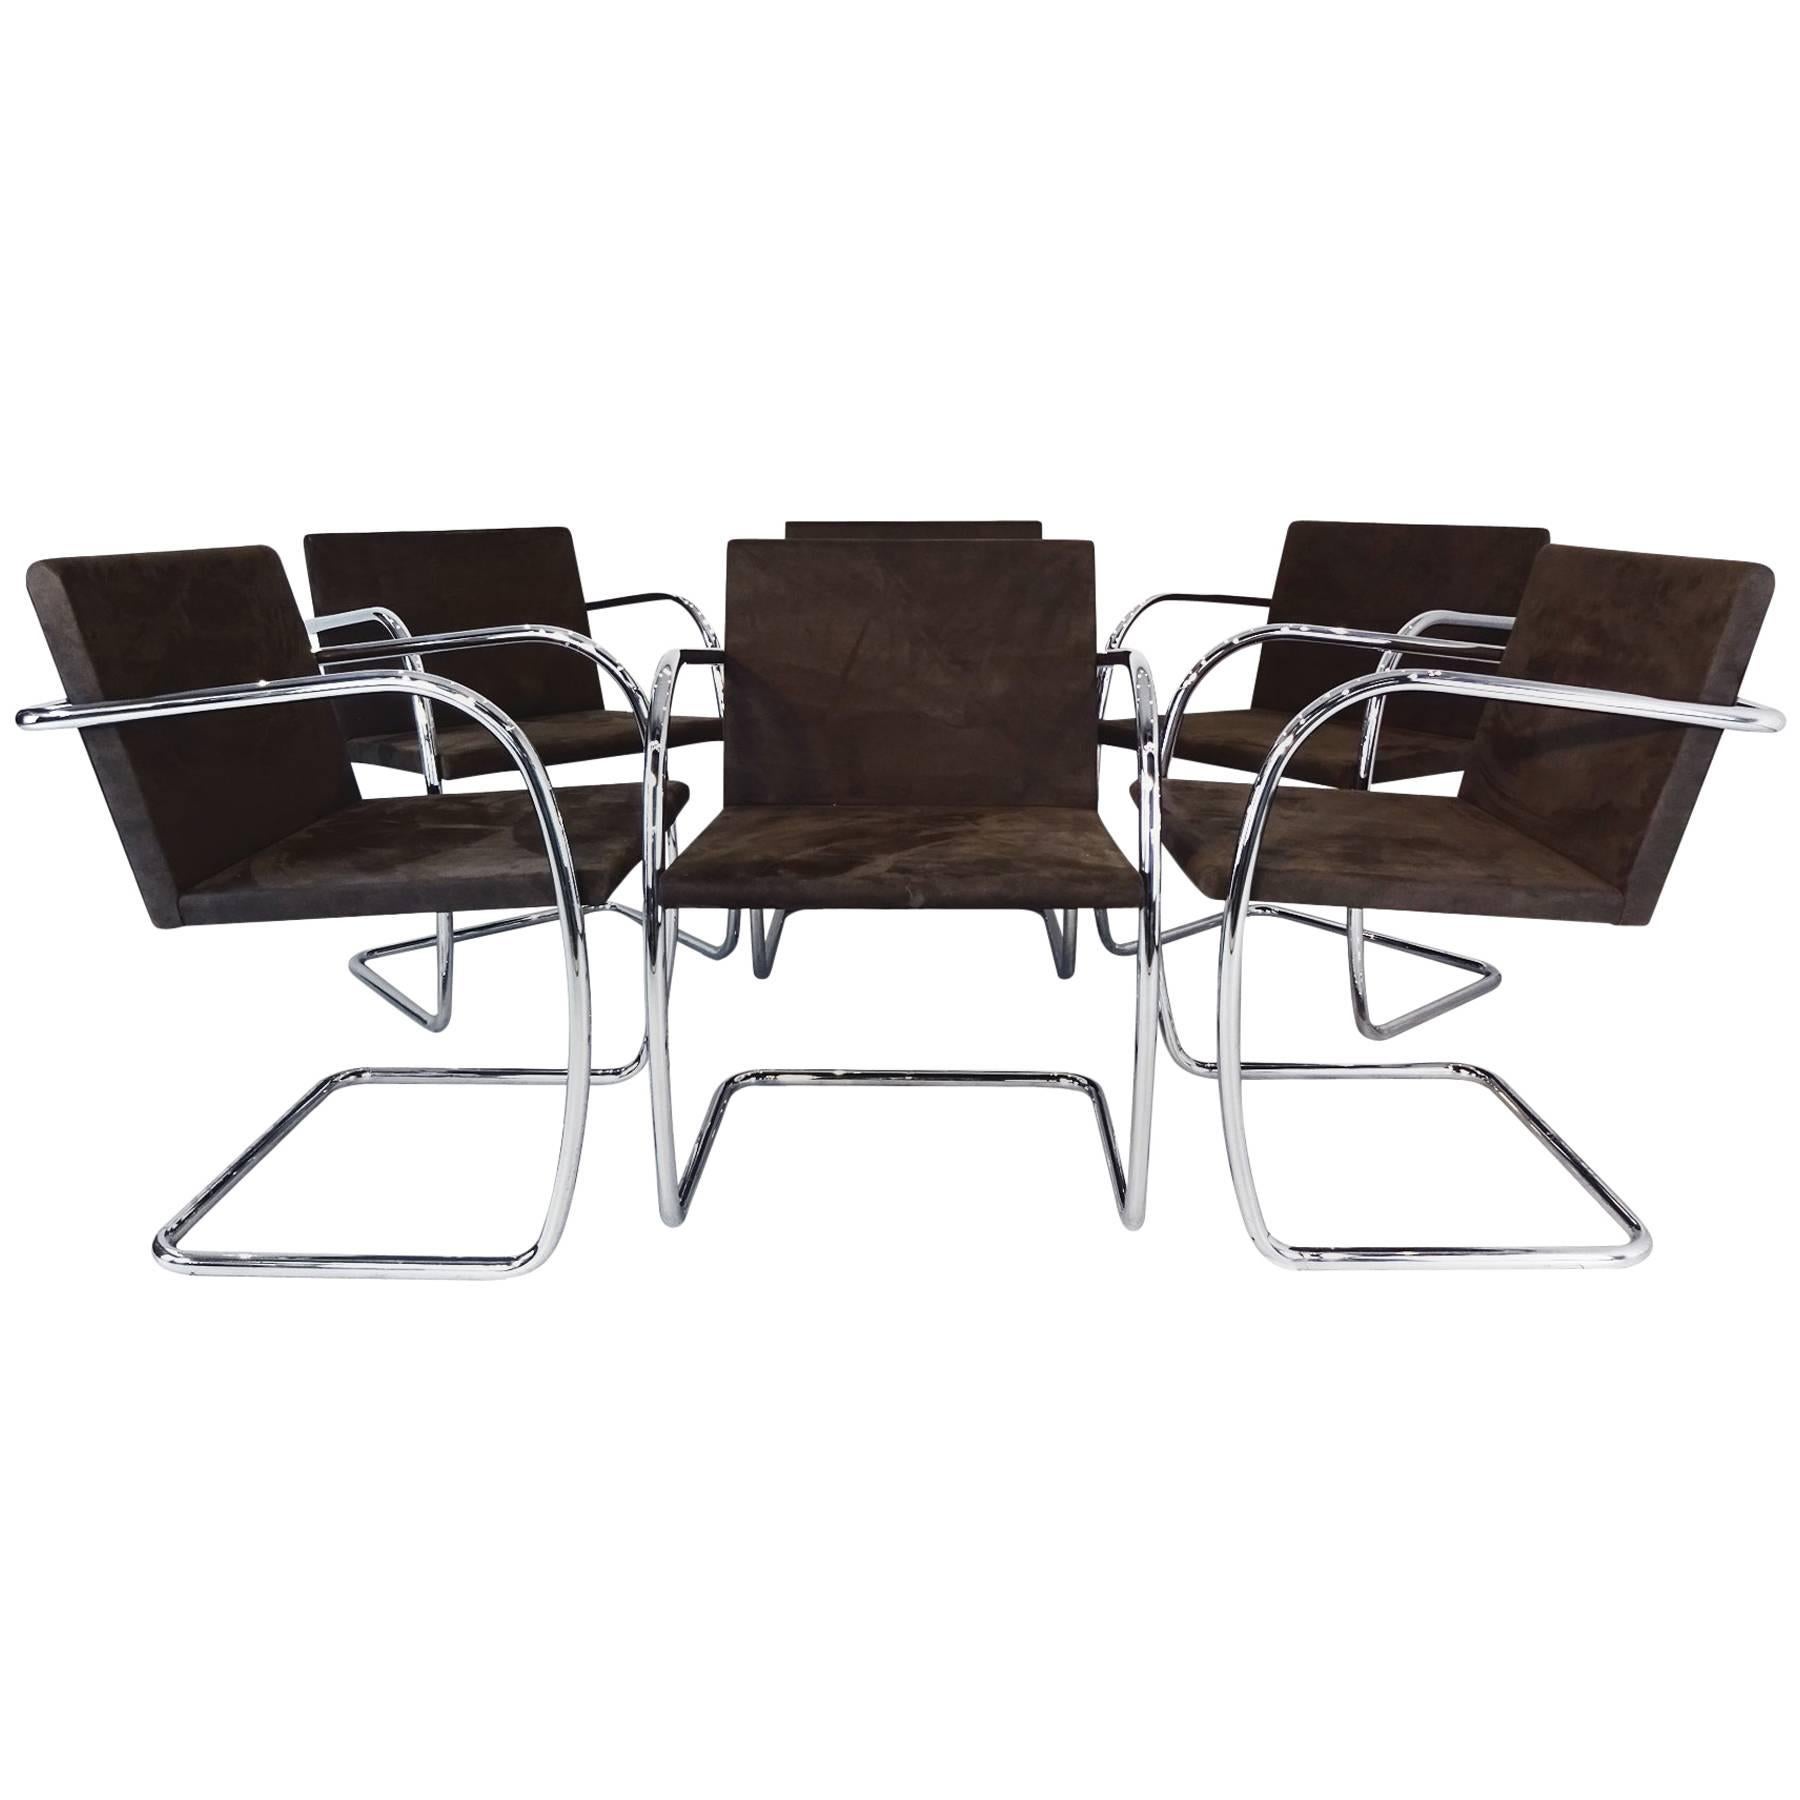 Set of Six Original Mies van der Rohe Brno Tubular Steel and Suede Chairs For Sale